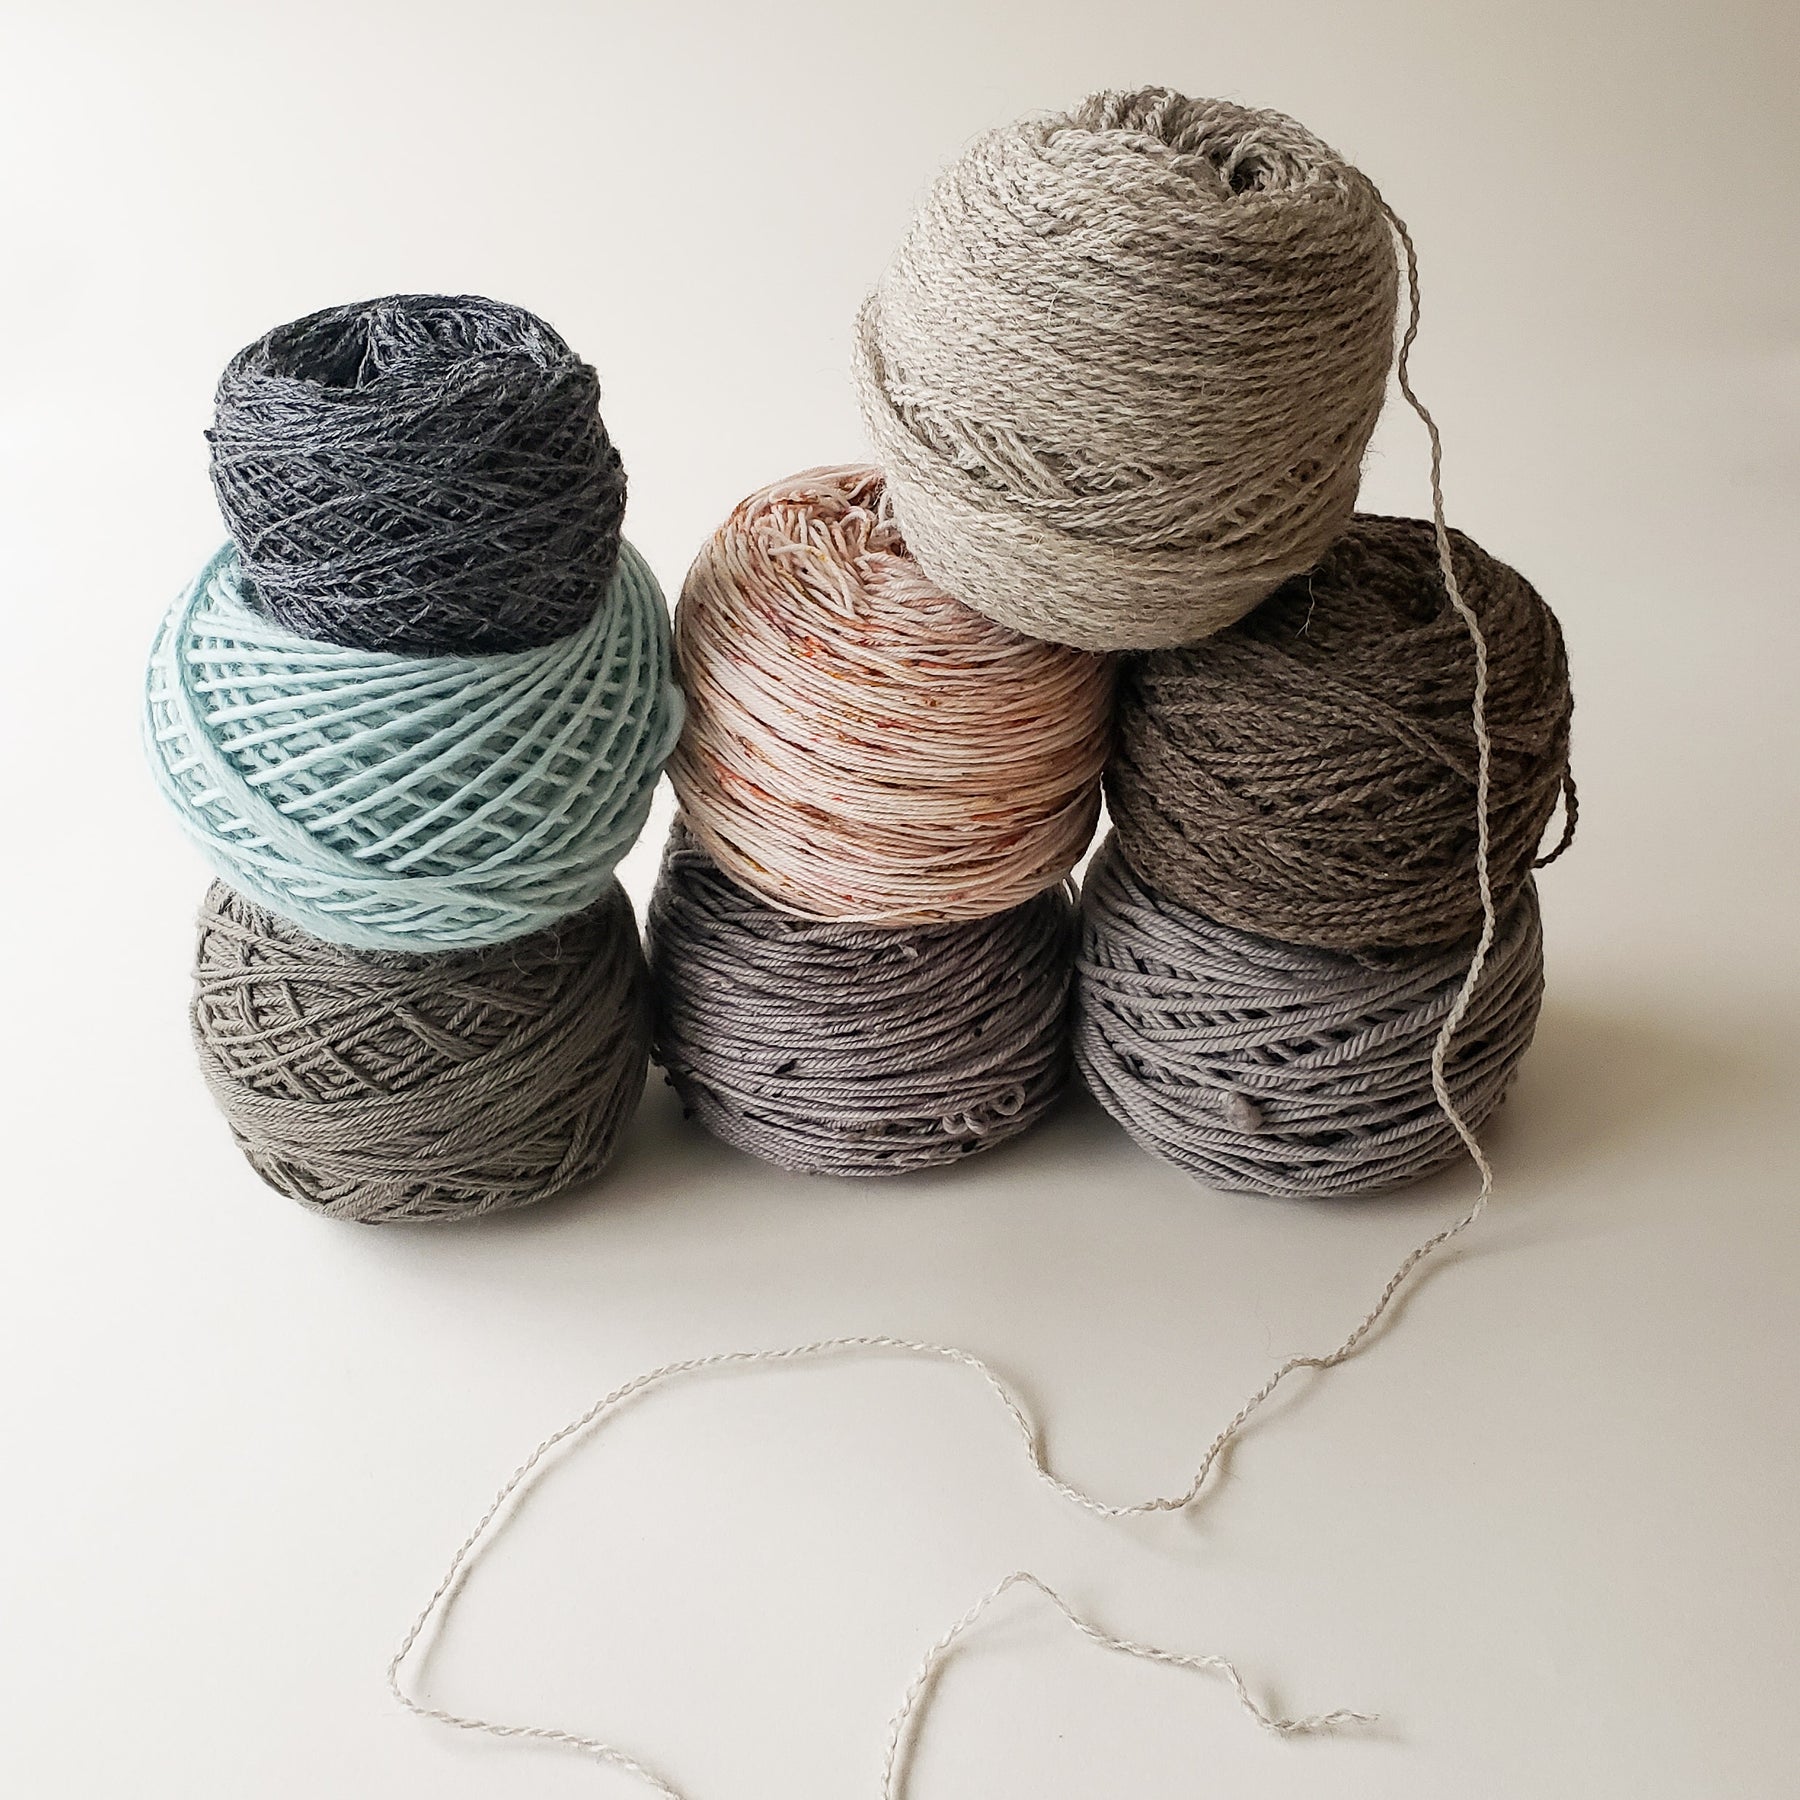 Yarn Samples Are Here!